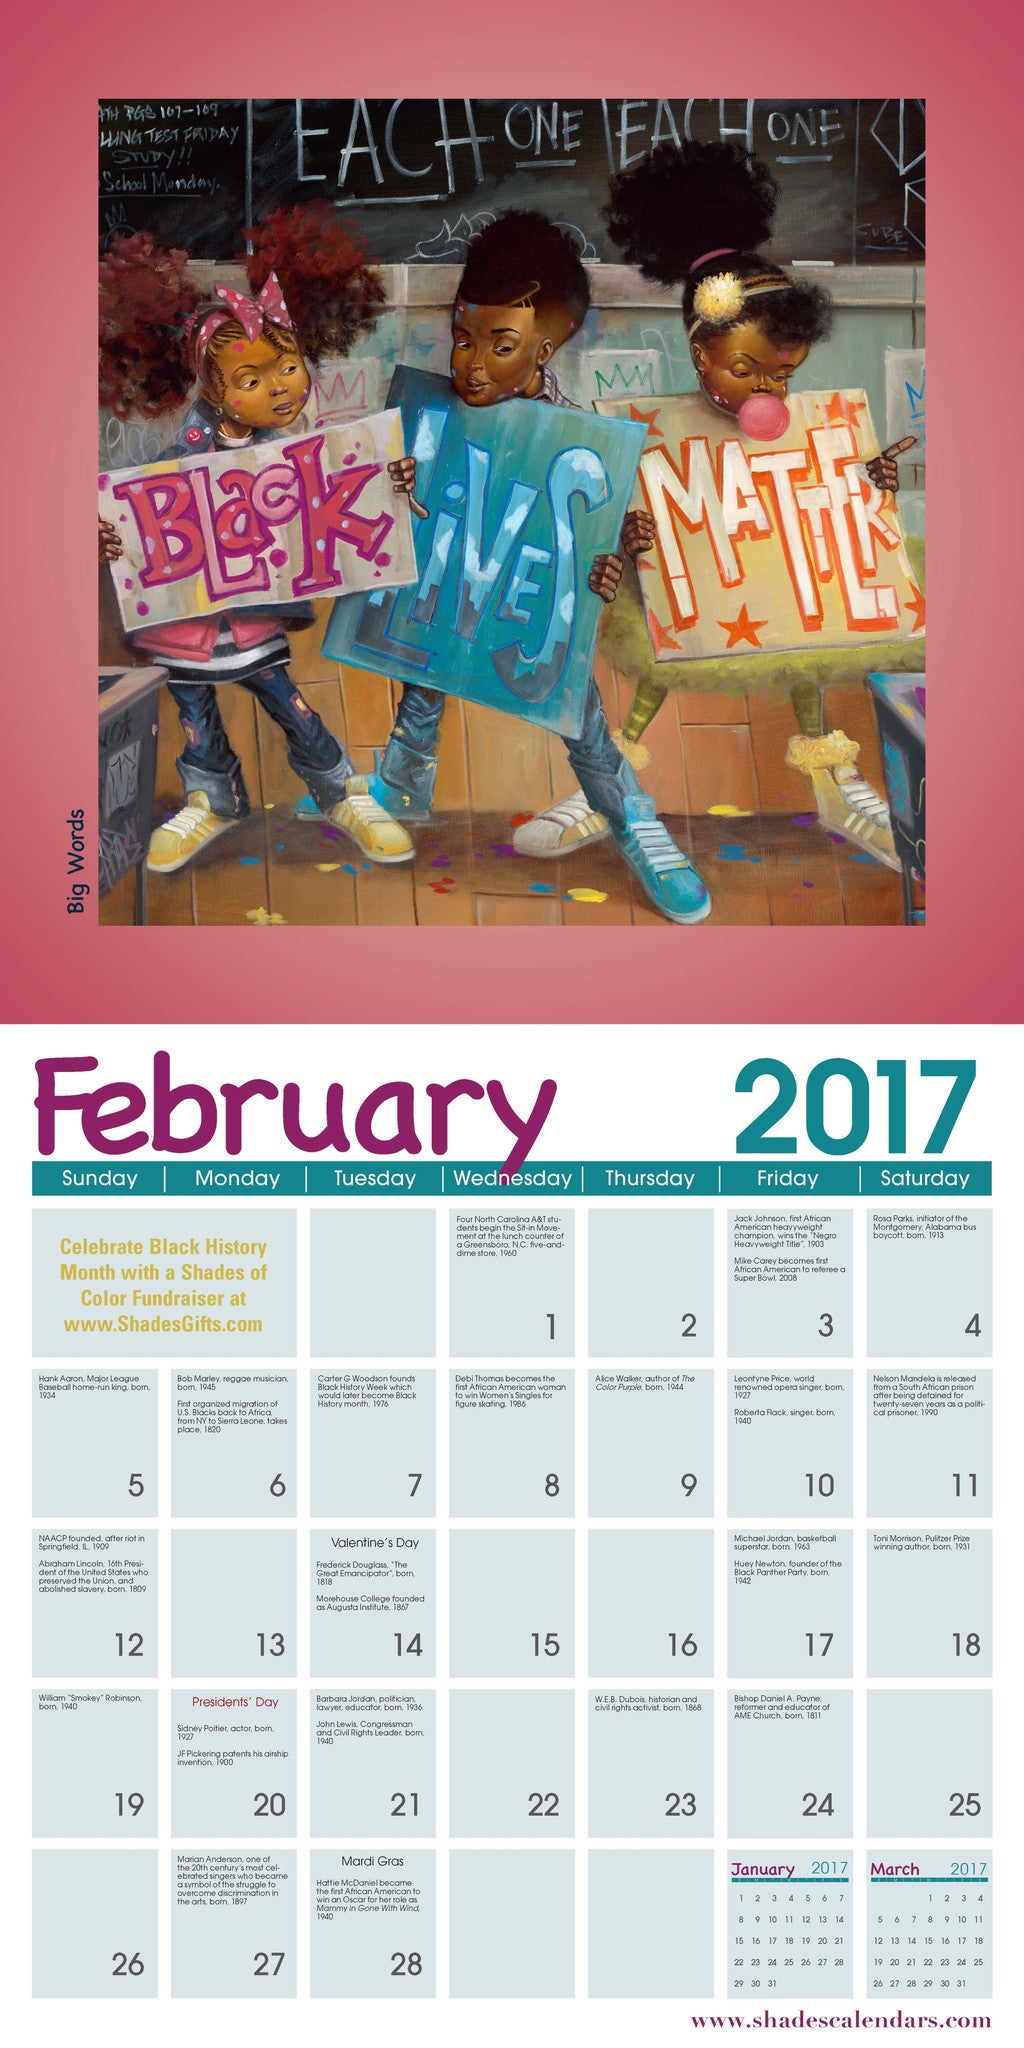 Shades of Color Kids by Frank Morrison (2017 African American Calendar)